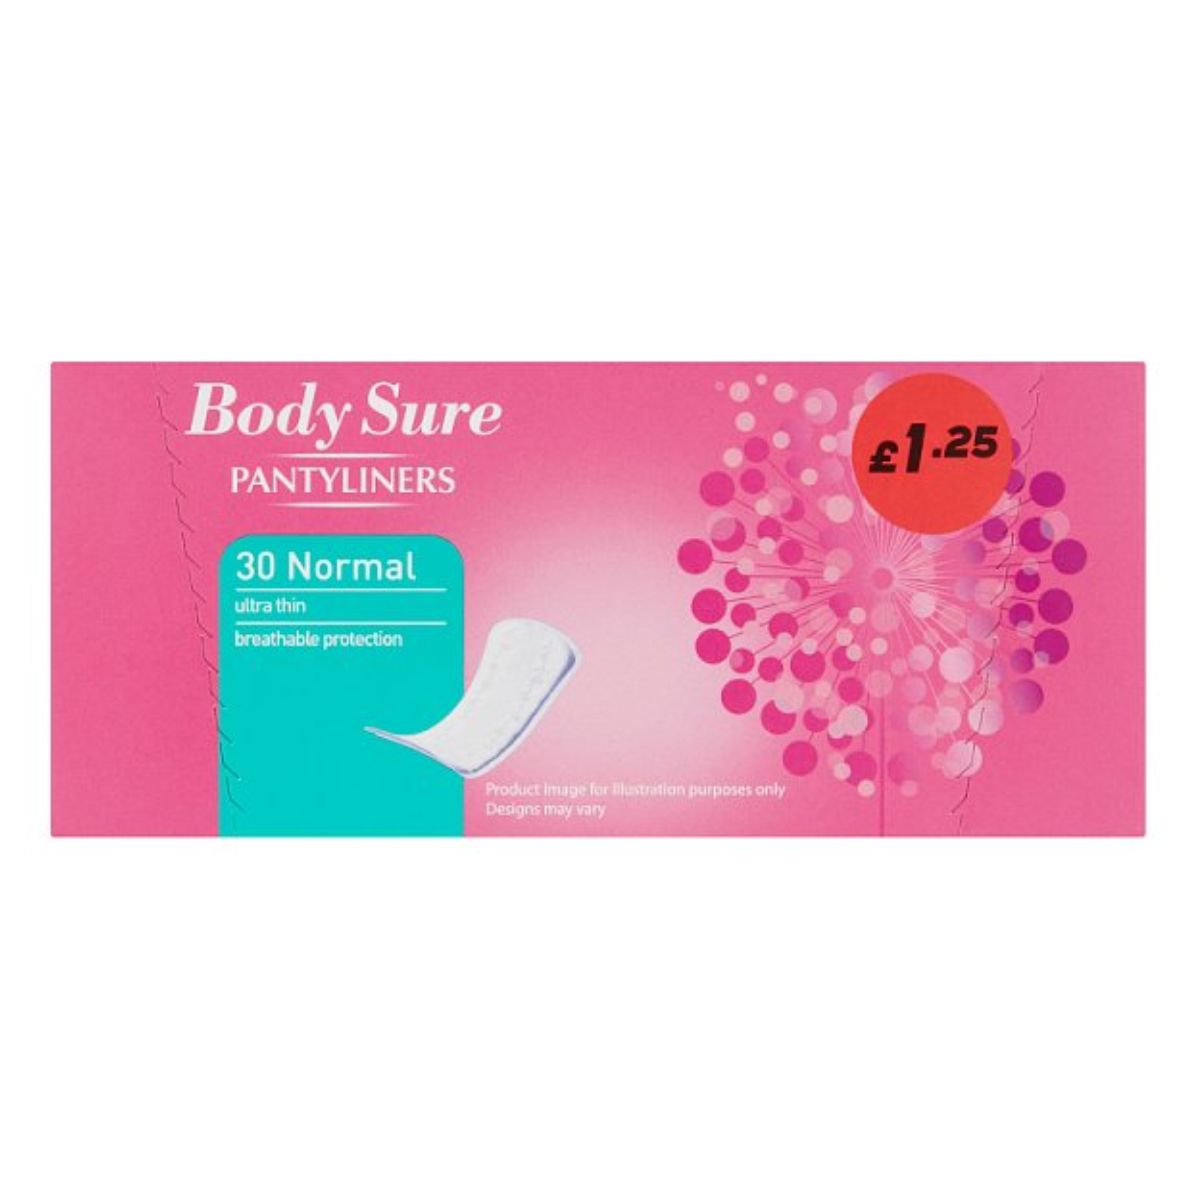 Body sure pantyliners in a pink package.